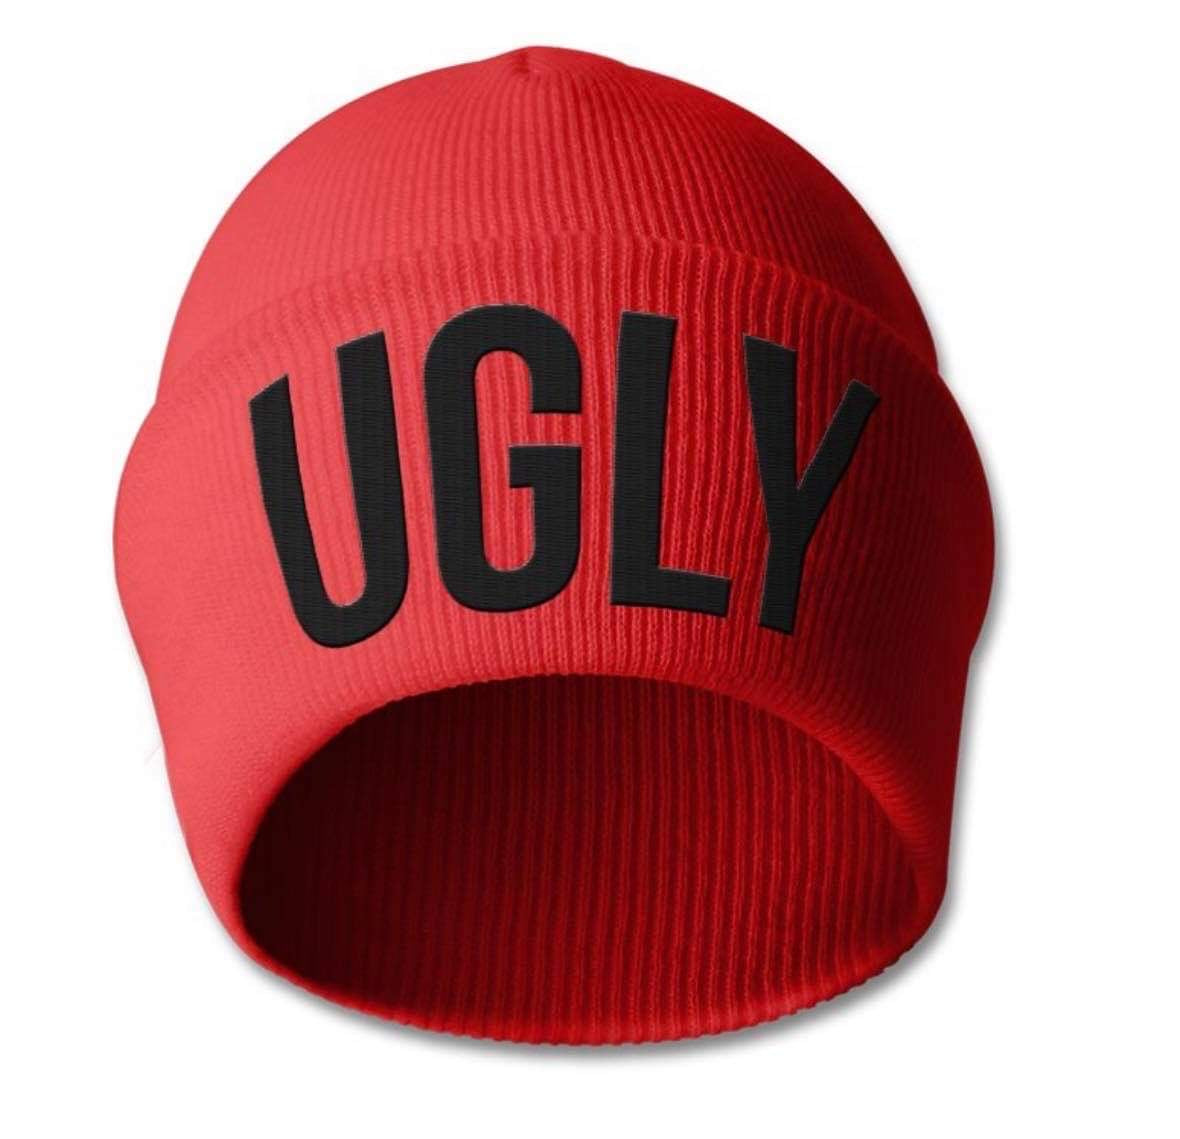 UGLY TOQUES 4 UGLY BLOKES